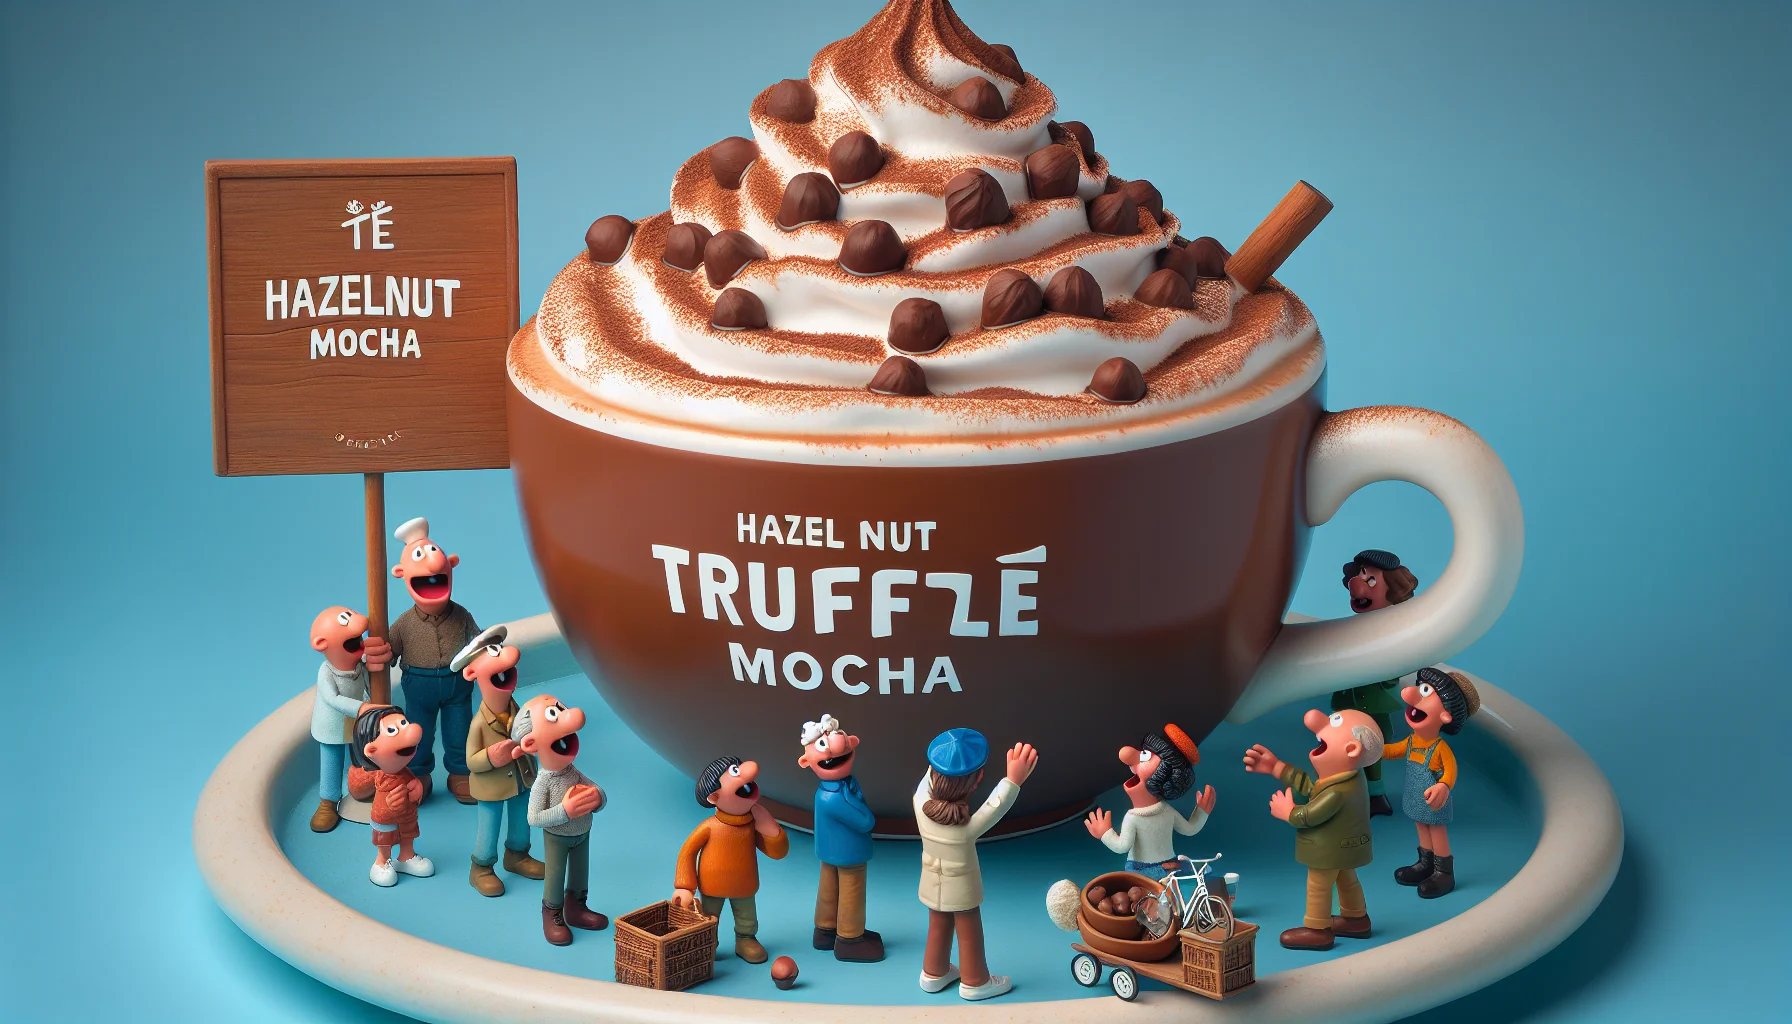 Create a humorous and whimsical scene where an oversized cup of hazelnut truffle mocha, typical of Dutch café culture, seems to be engaging people into partaking. It's filled to the brim with creamy froth and topped with a dusting of cocoa. The people around it should be captivated by its aroma, comically expressing their craving to taste it. The scene should clearly communicate the irresistible allure of the beverage, inviting viewers to enjoy a sip of this delightful beverage.